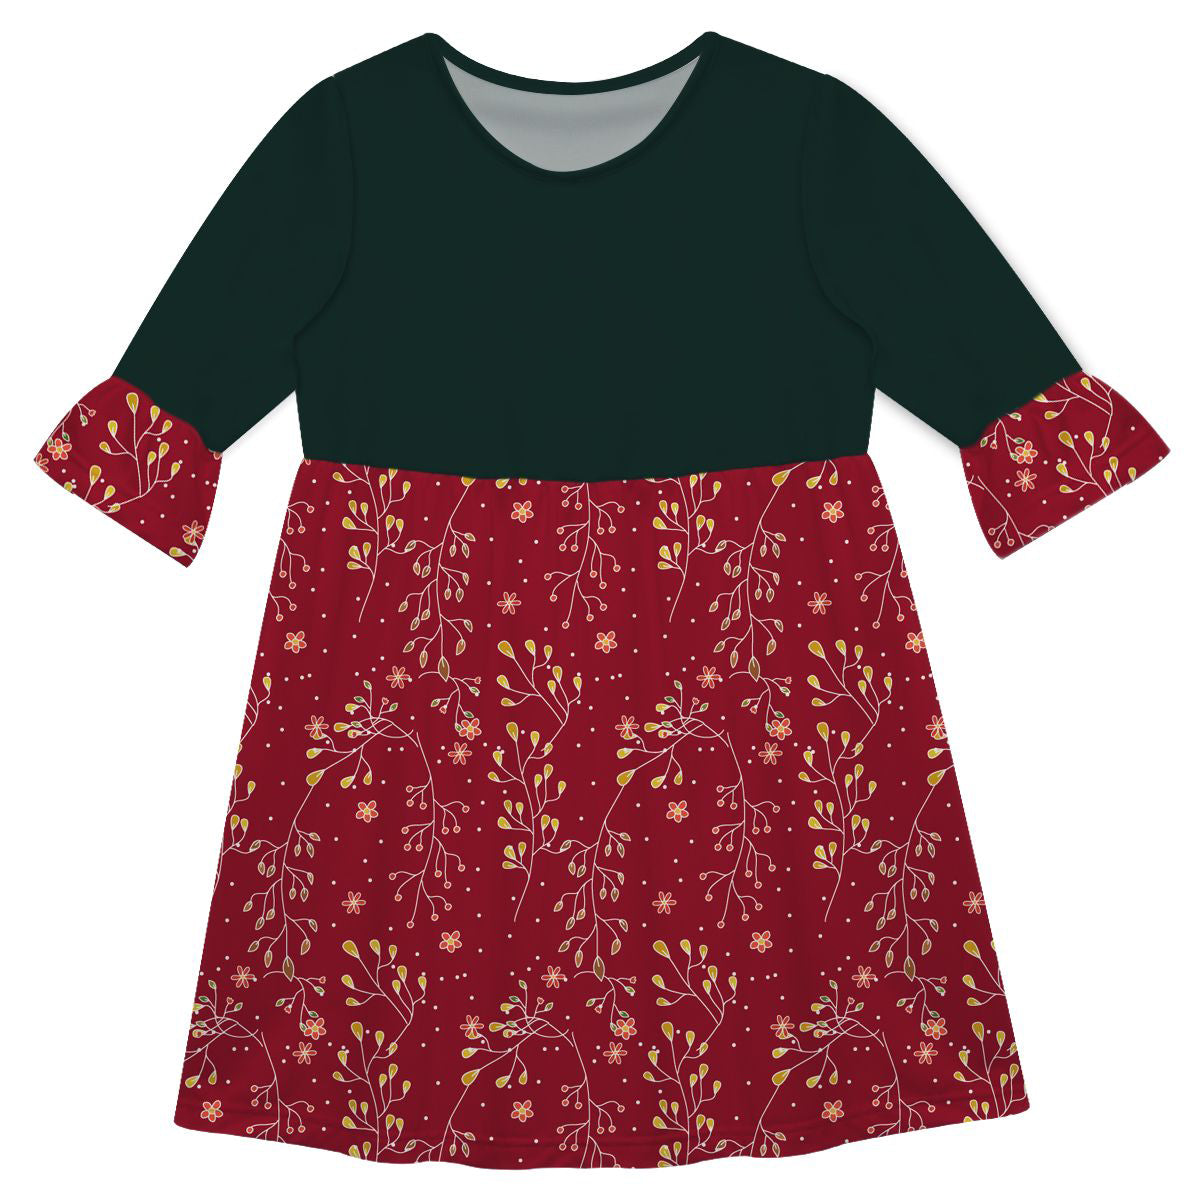 Girls maroon and gree fall dress with monogram - Wimziy&Co.